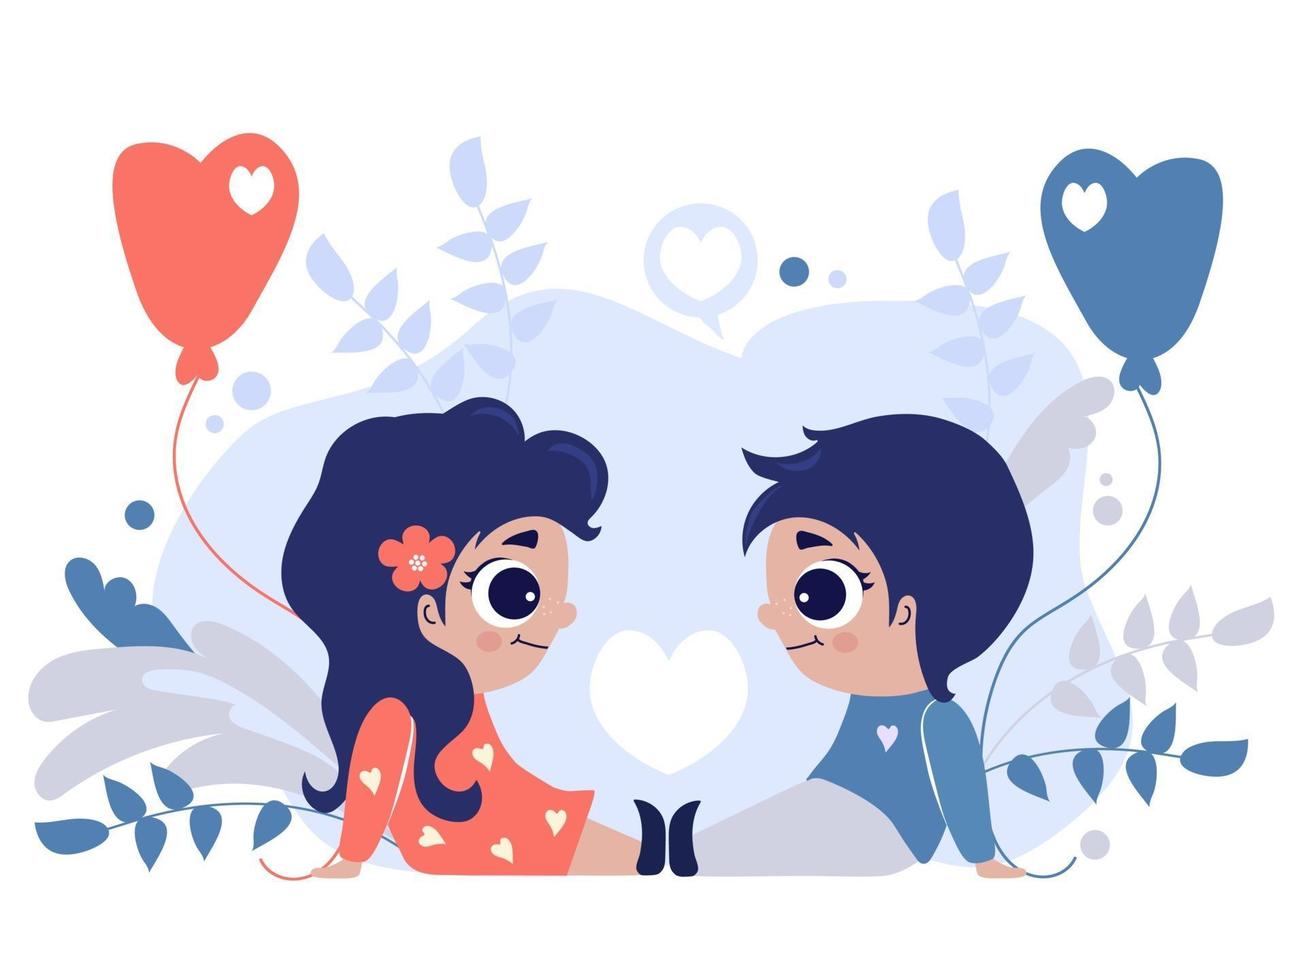 Lovely little children. Couple - A girl and a boy sit opposite each other with balloons in their hands on purple background with decorative flowers and leaves. Vector illustration. childrens concept